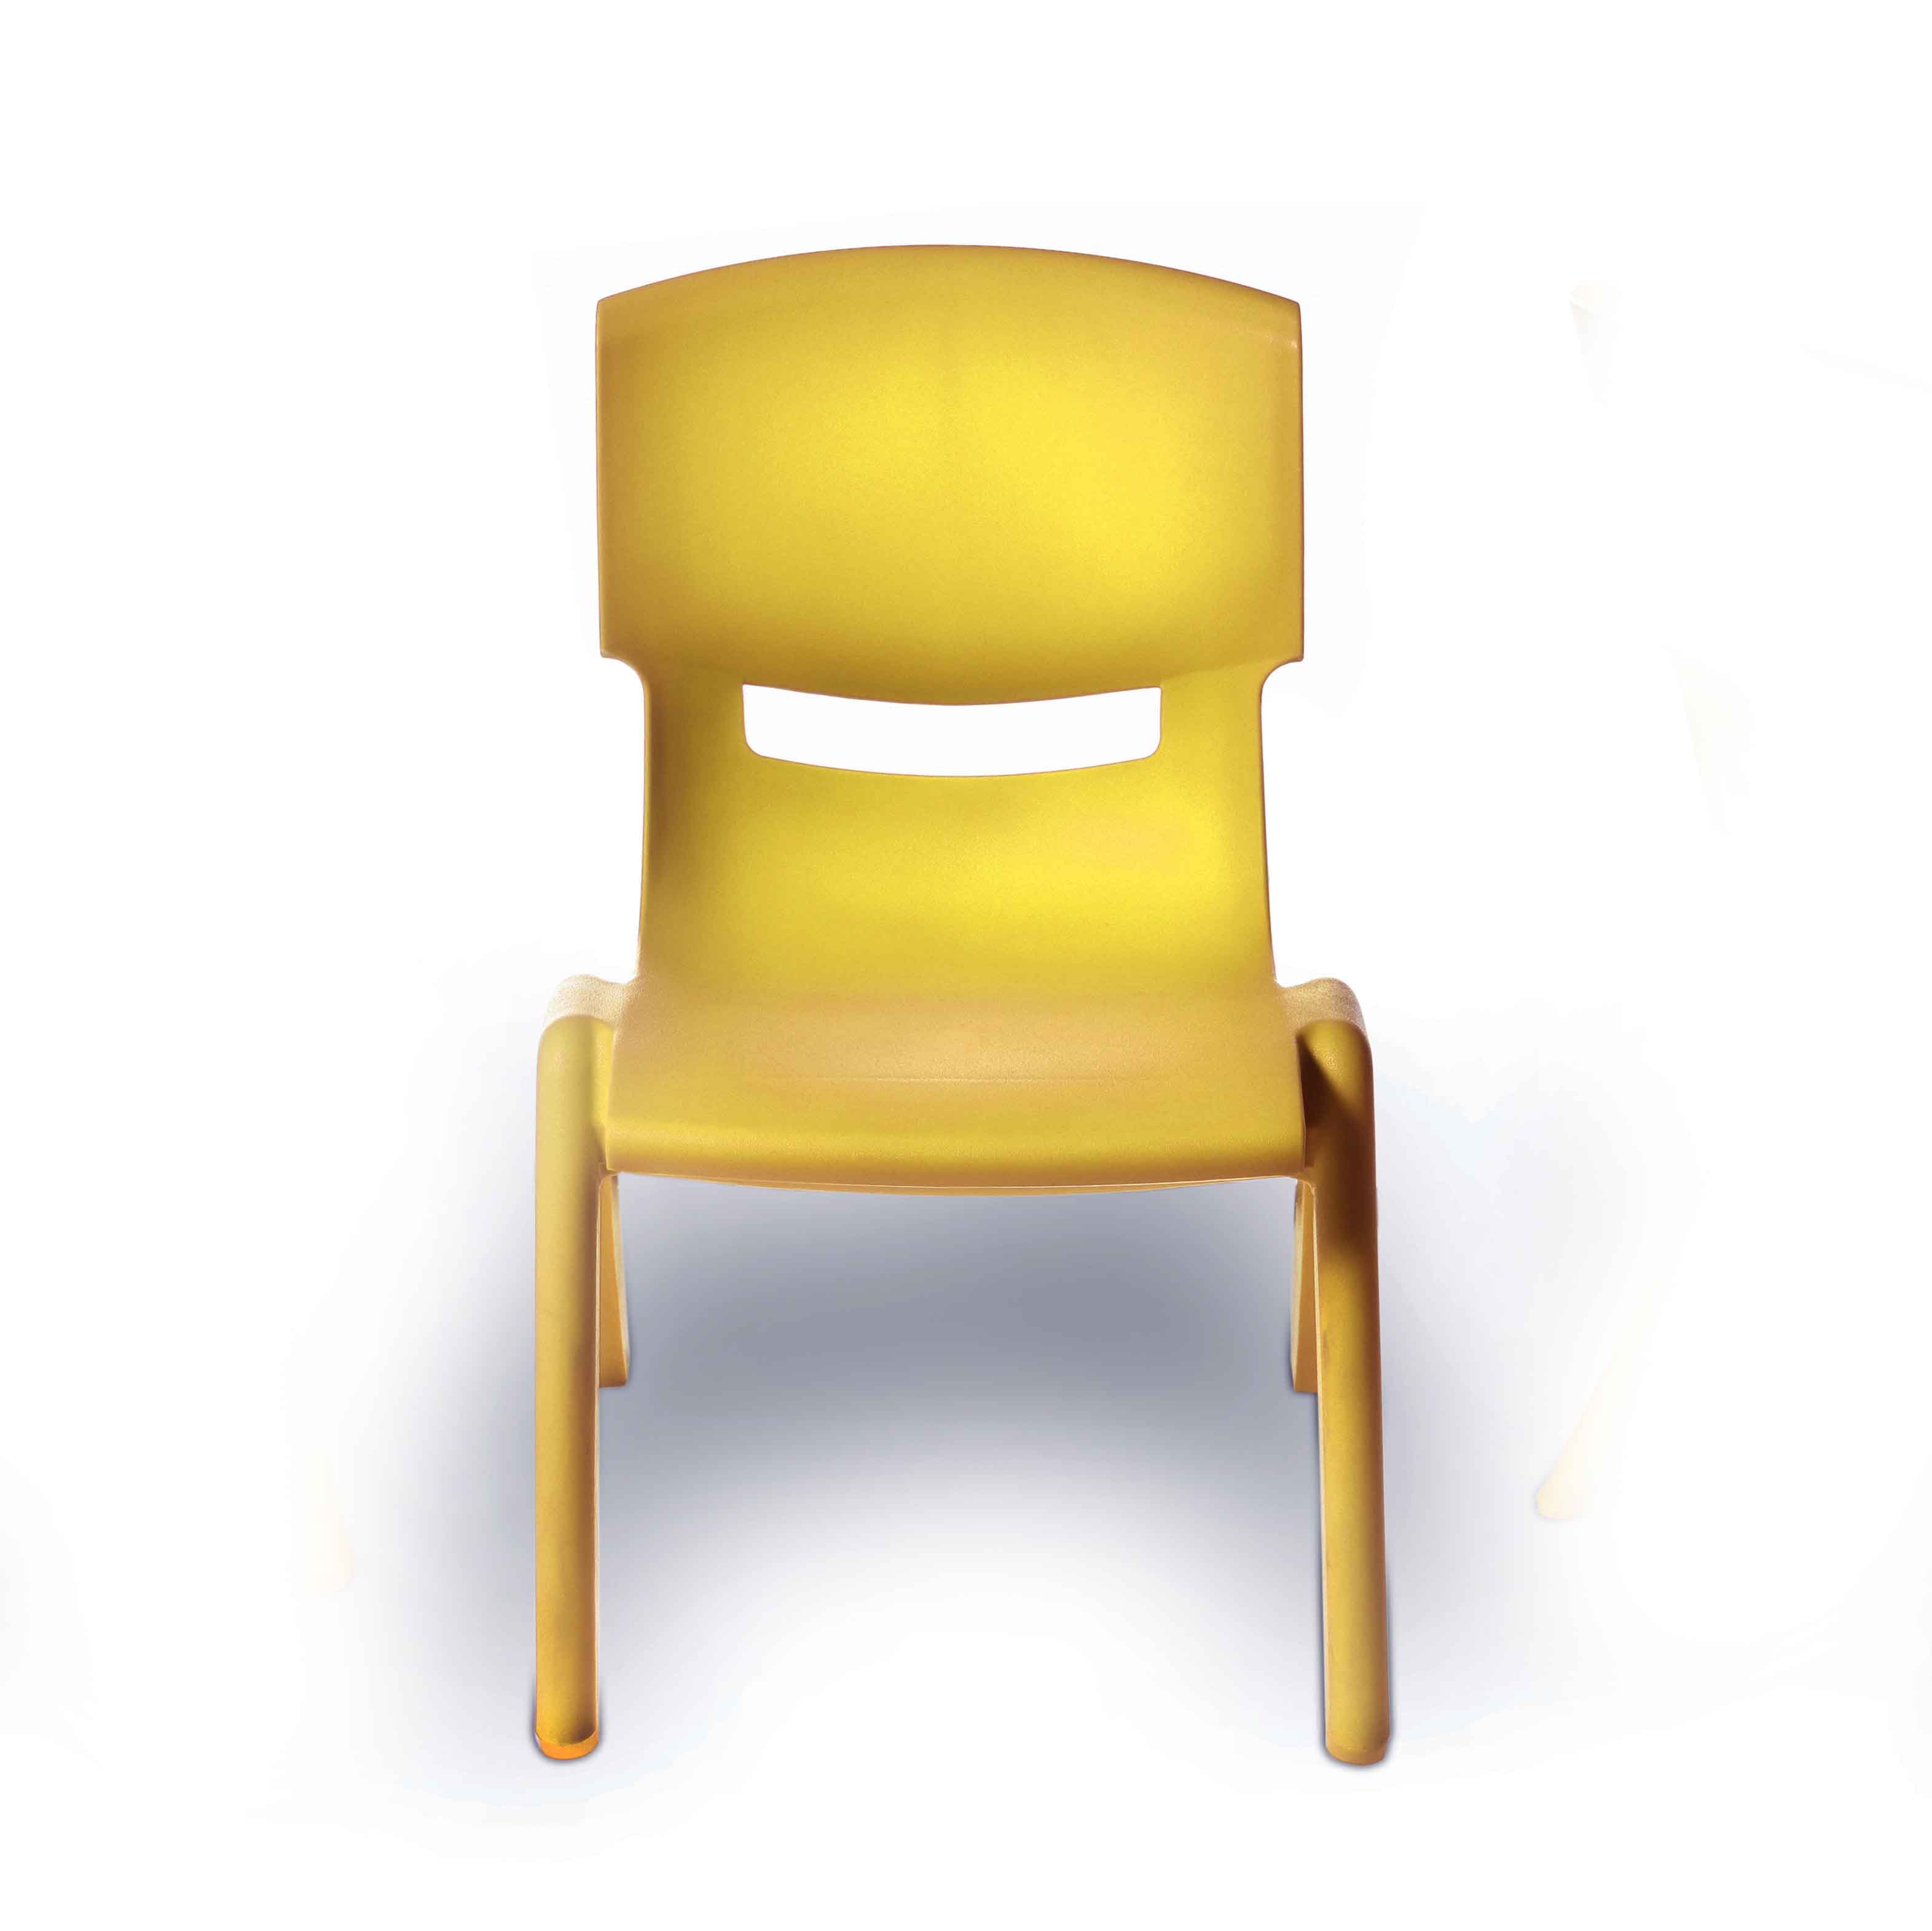 Kidicare - Stackable Plastic Chairs